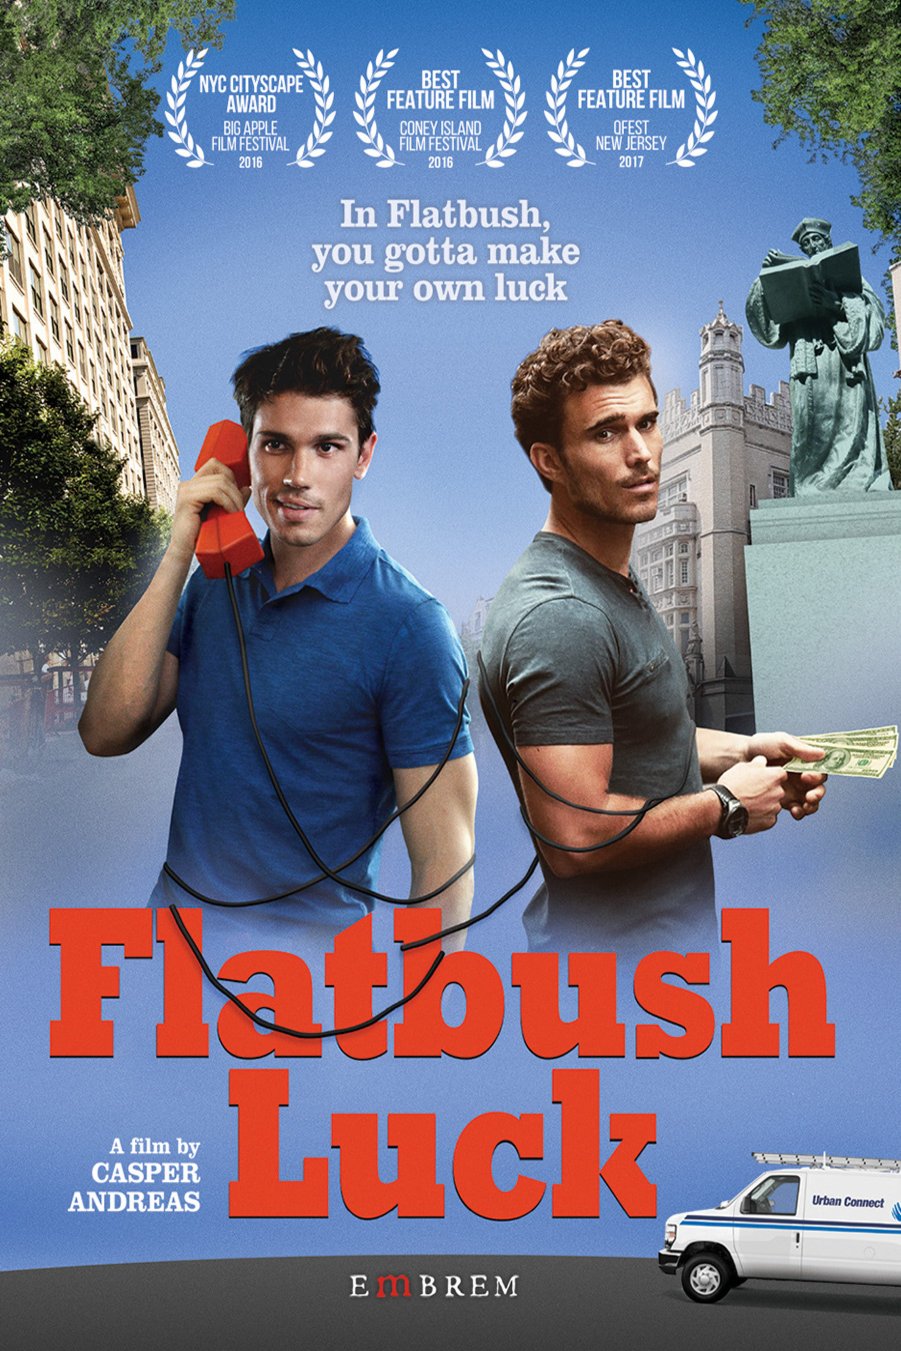 Poster of the movie Flatbush Luck